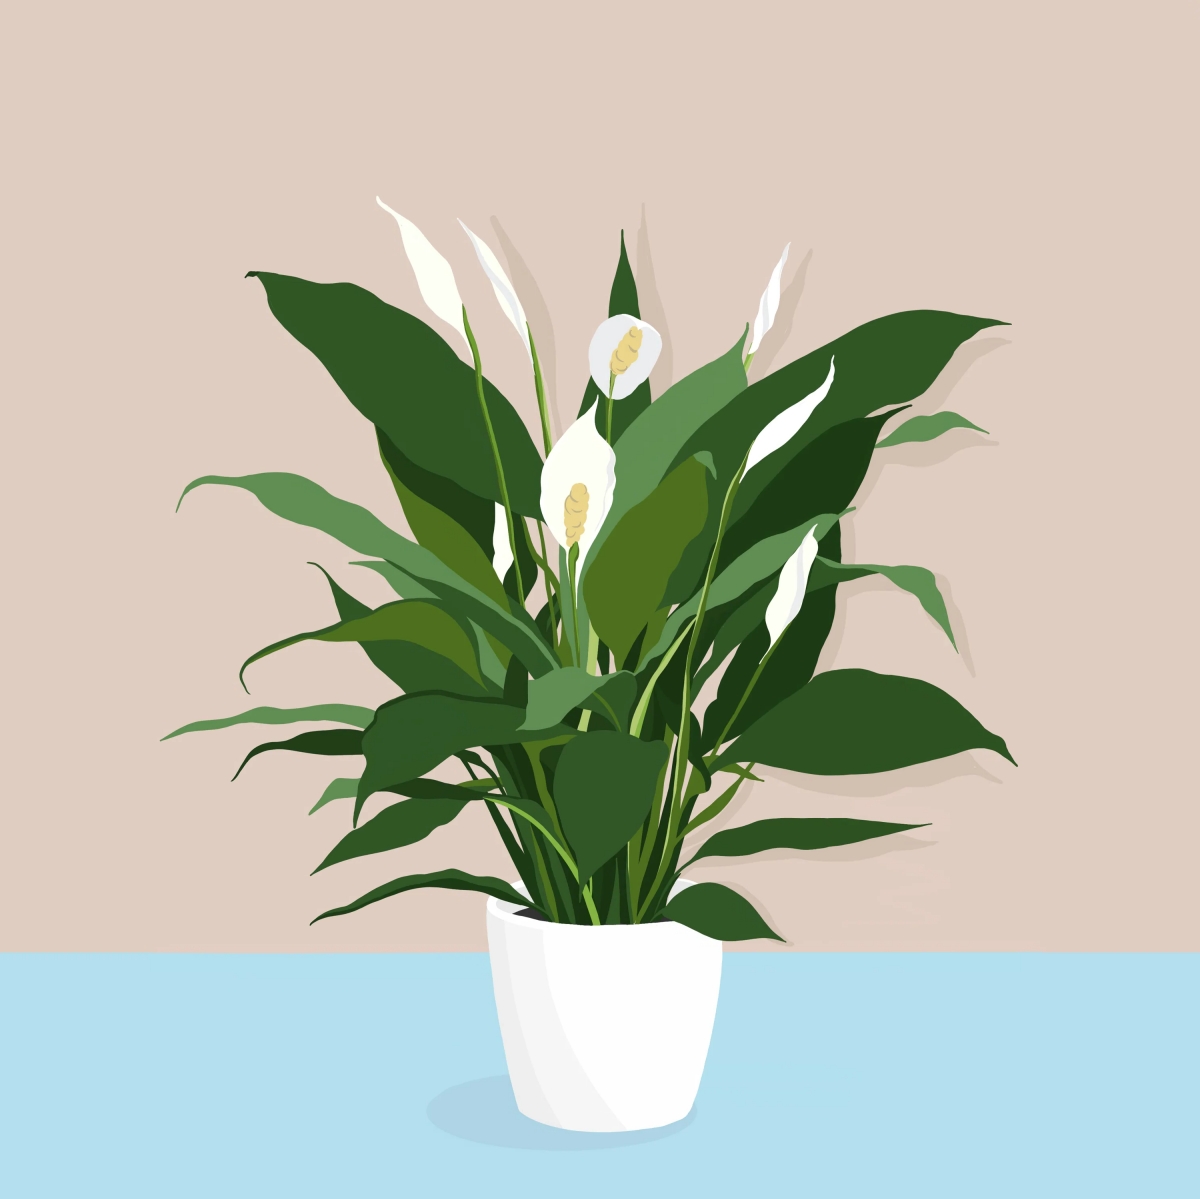 8 Surprising Benefits of Owning a Peace Lily Plant